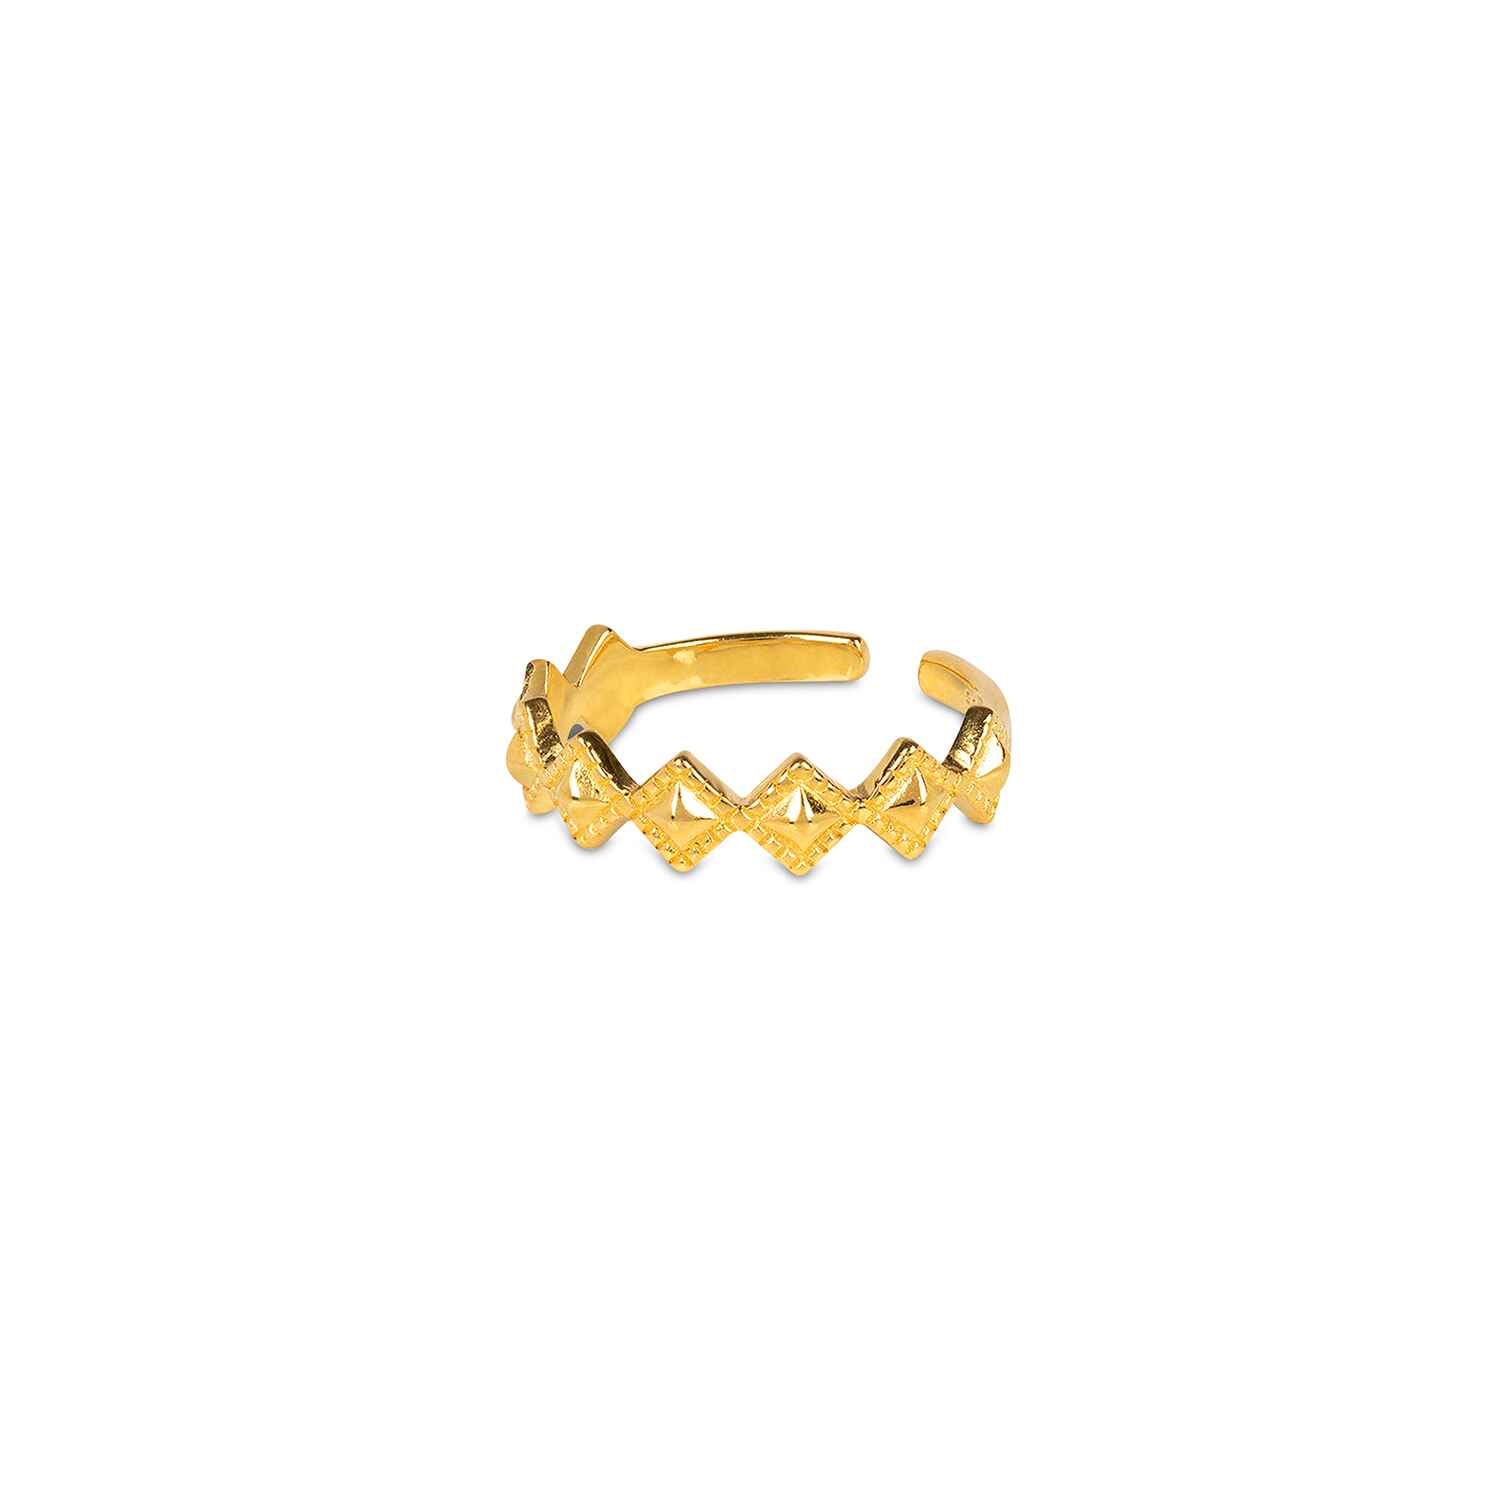 The Tellus Gold Stacking Ring is embellished with a triangular design and is fully size adjustable. Handmade with sustainable materials, this stacking ring is high polished in 18k gold.